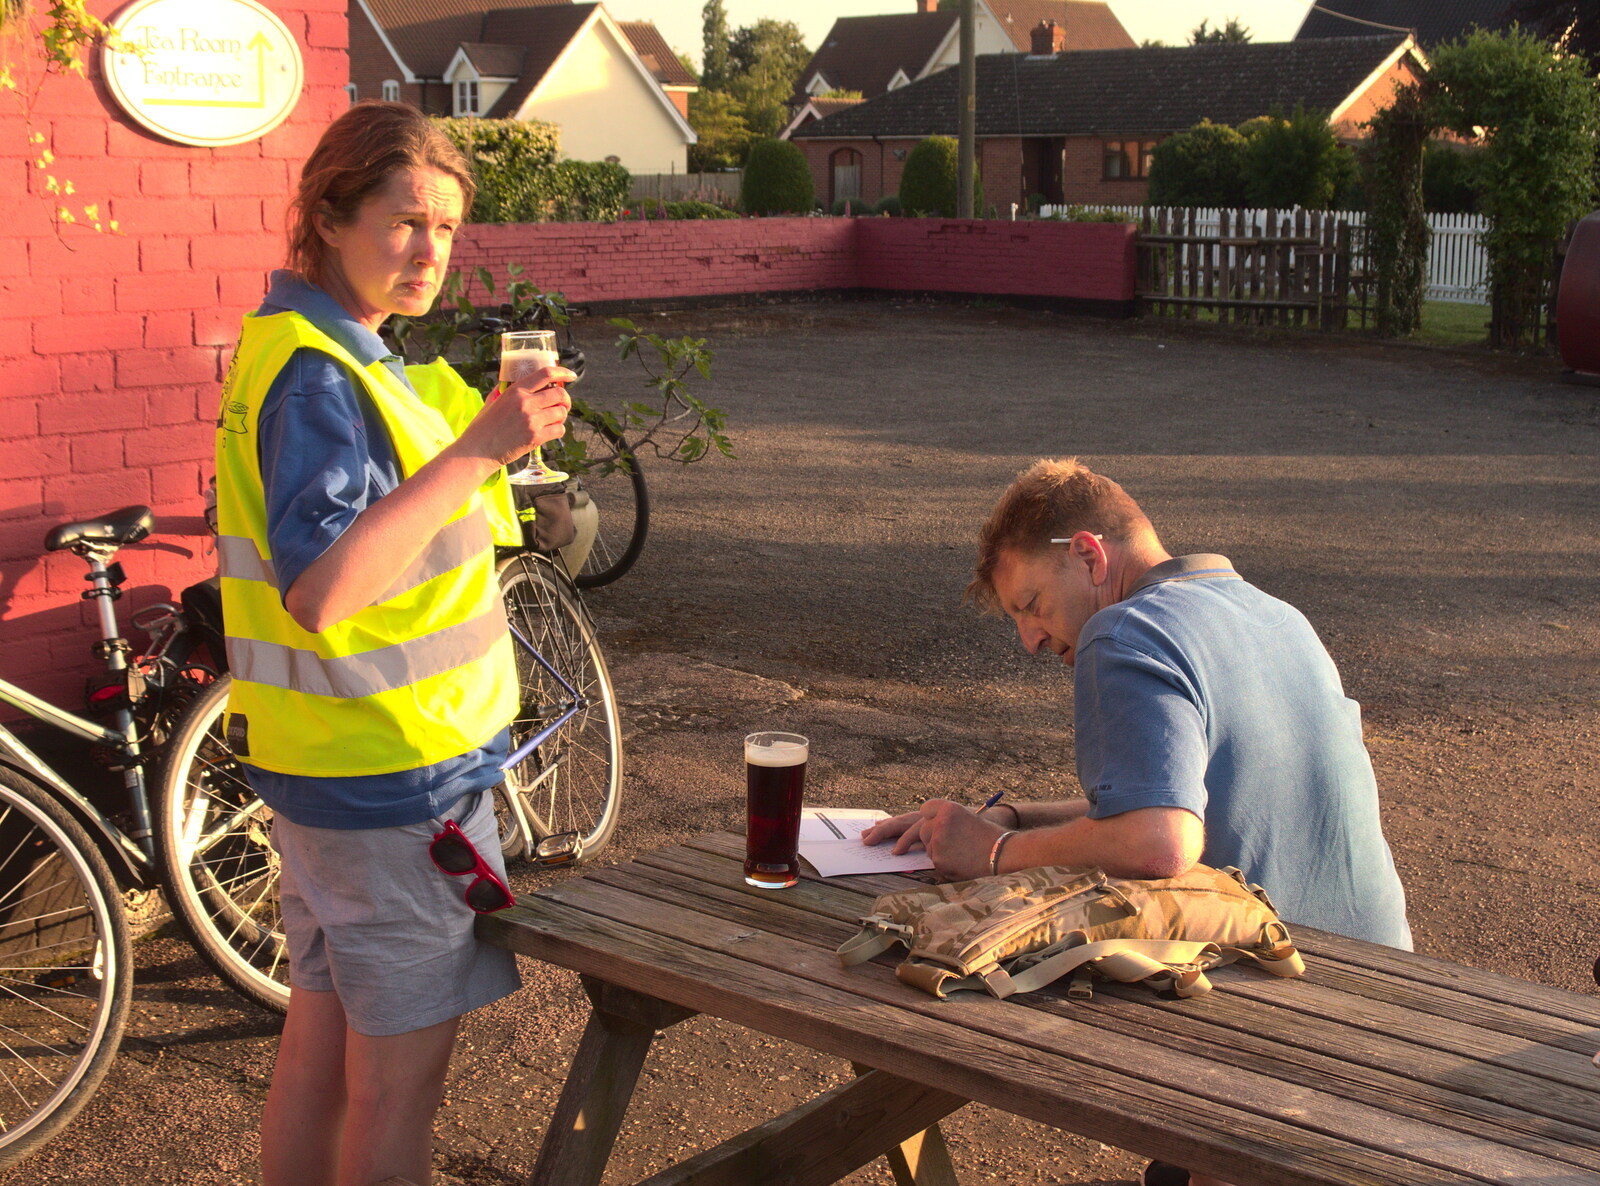 Isobel's got a half of beer from The BSCC Rides to the Six Bells, Gislingham, Suffolk - 1st June 2017